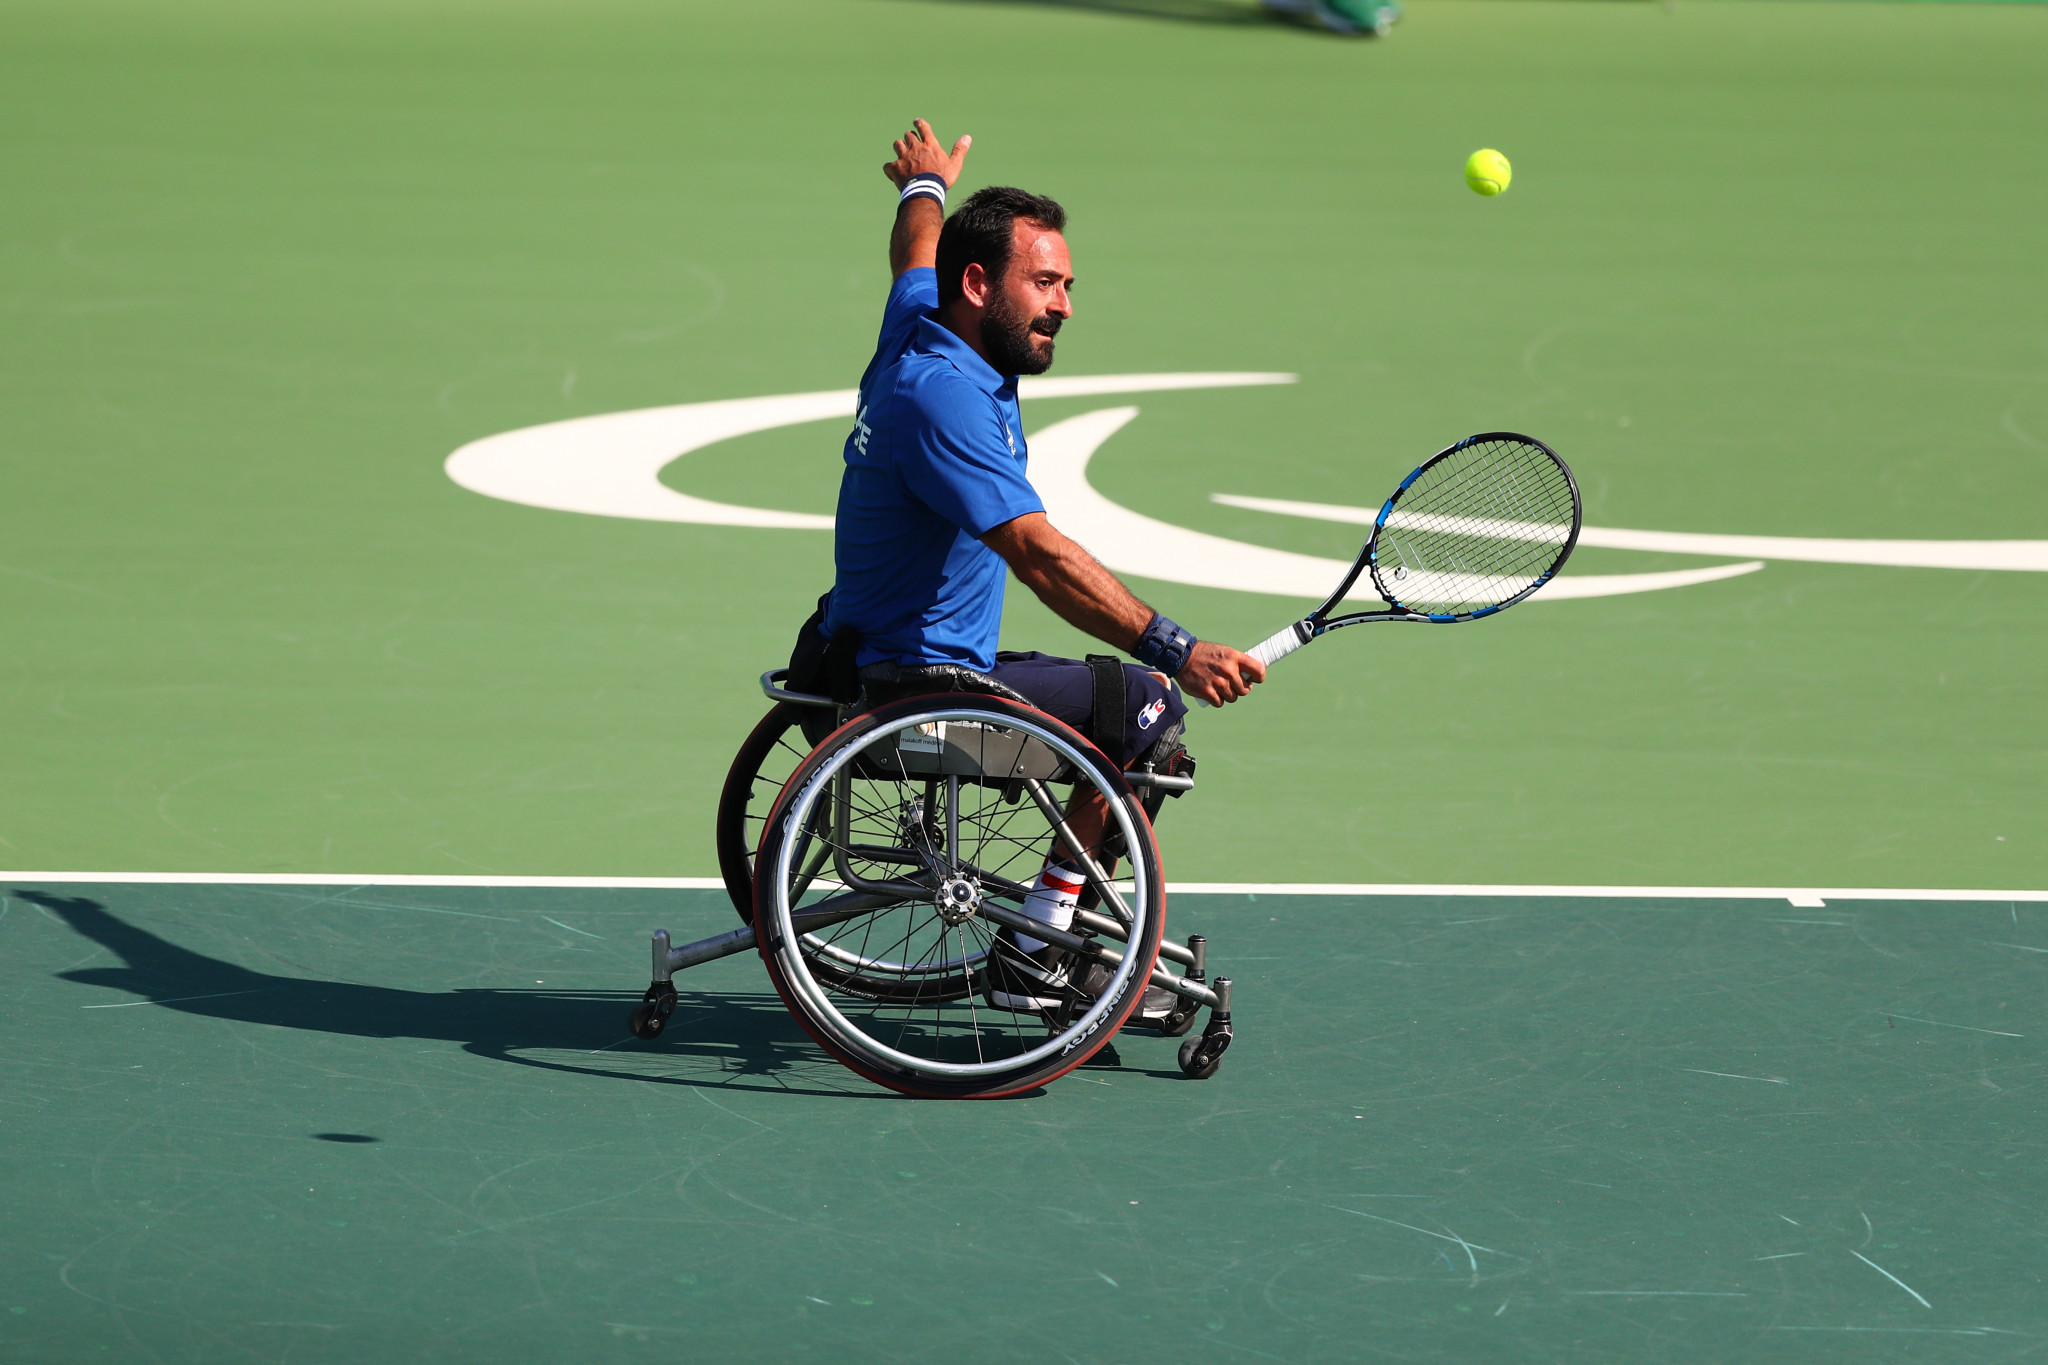 Paralympic medallist Jérémiasz took on tournament director role to "give back" to wheelchair tennis